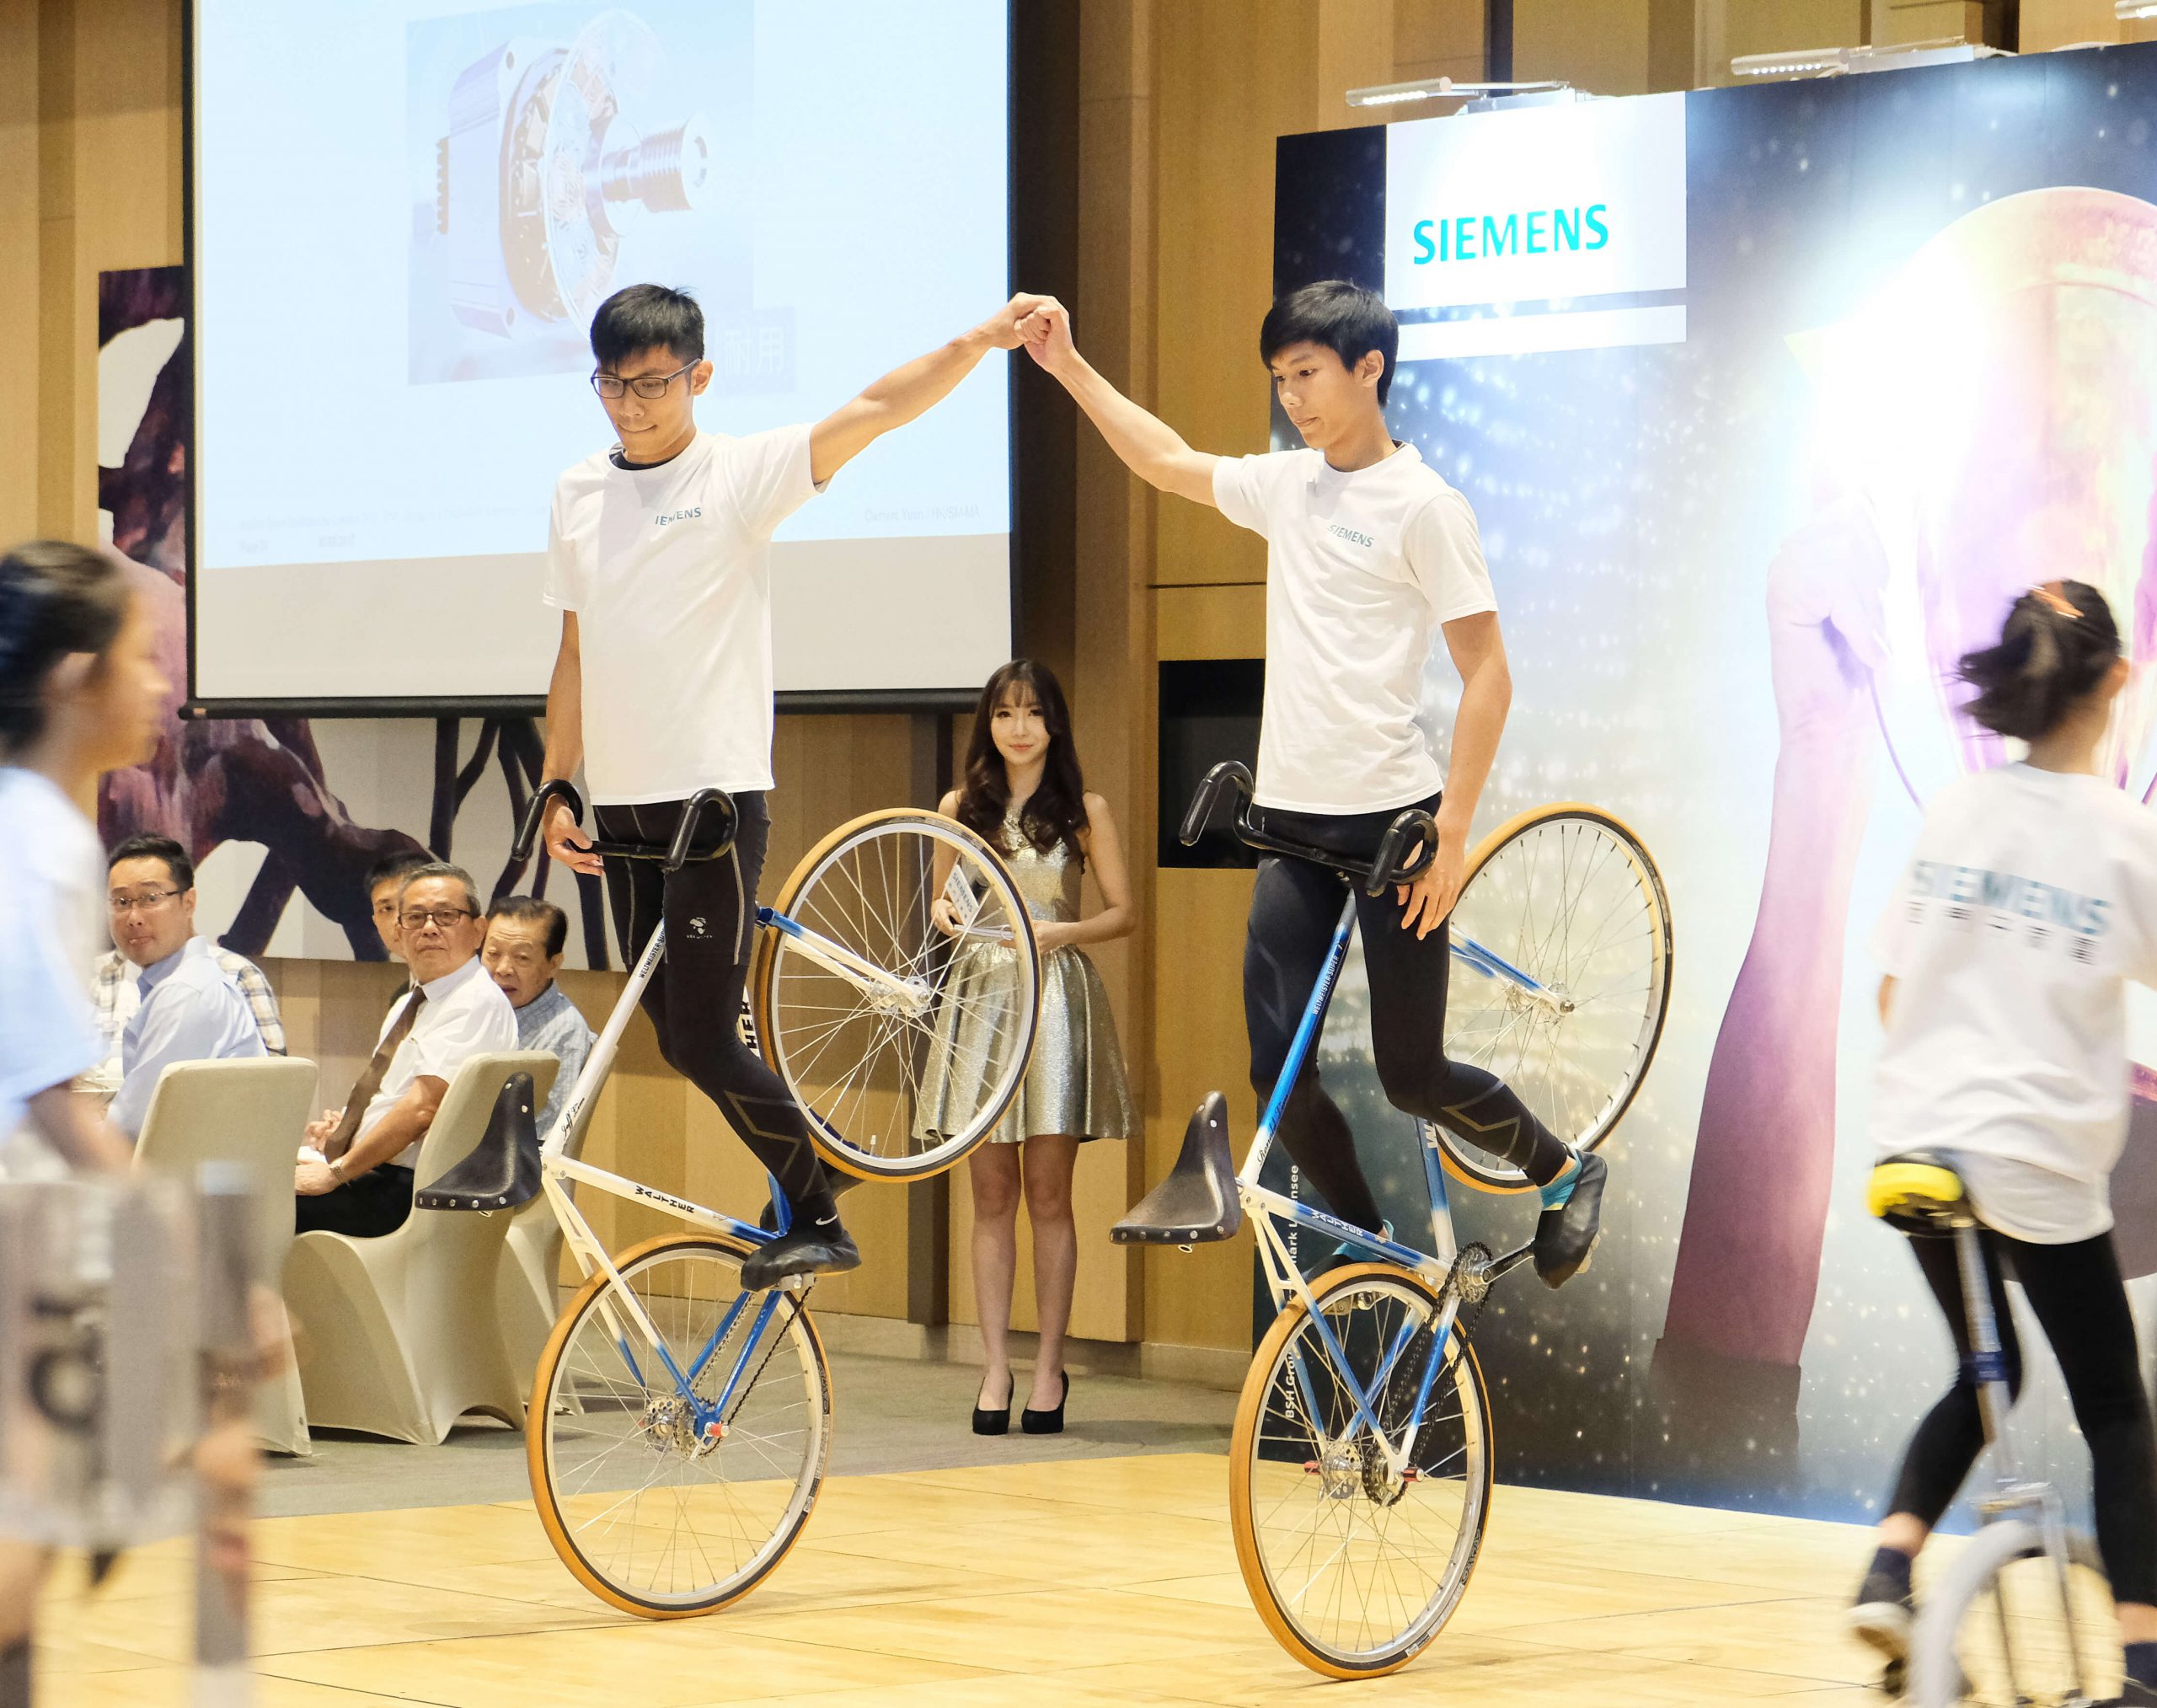 Artistic Cycling Performance Indoor (Siemens)